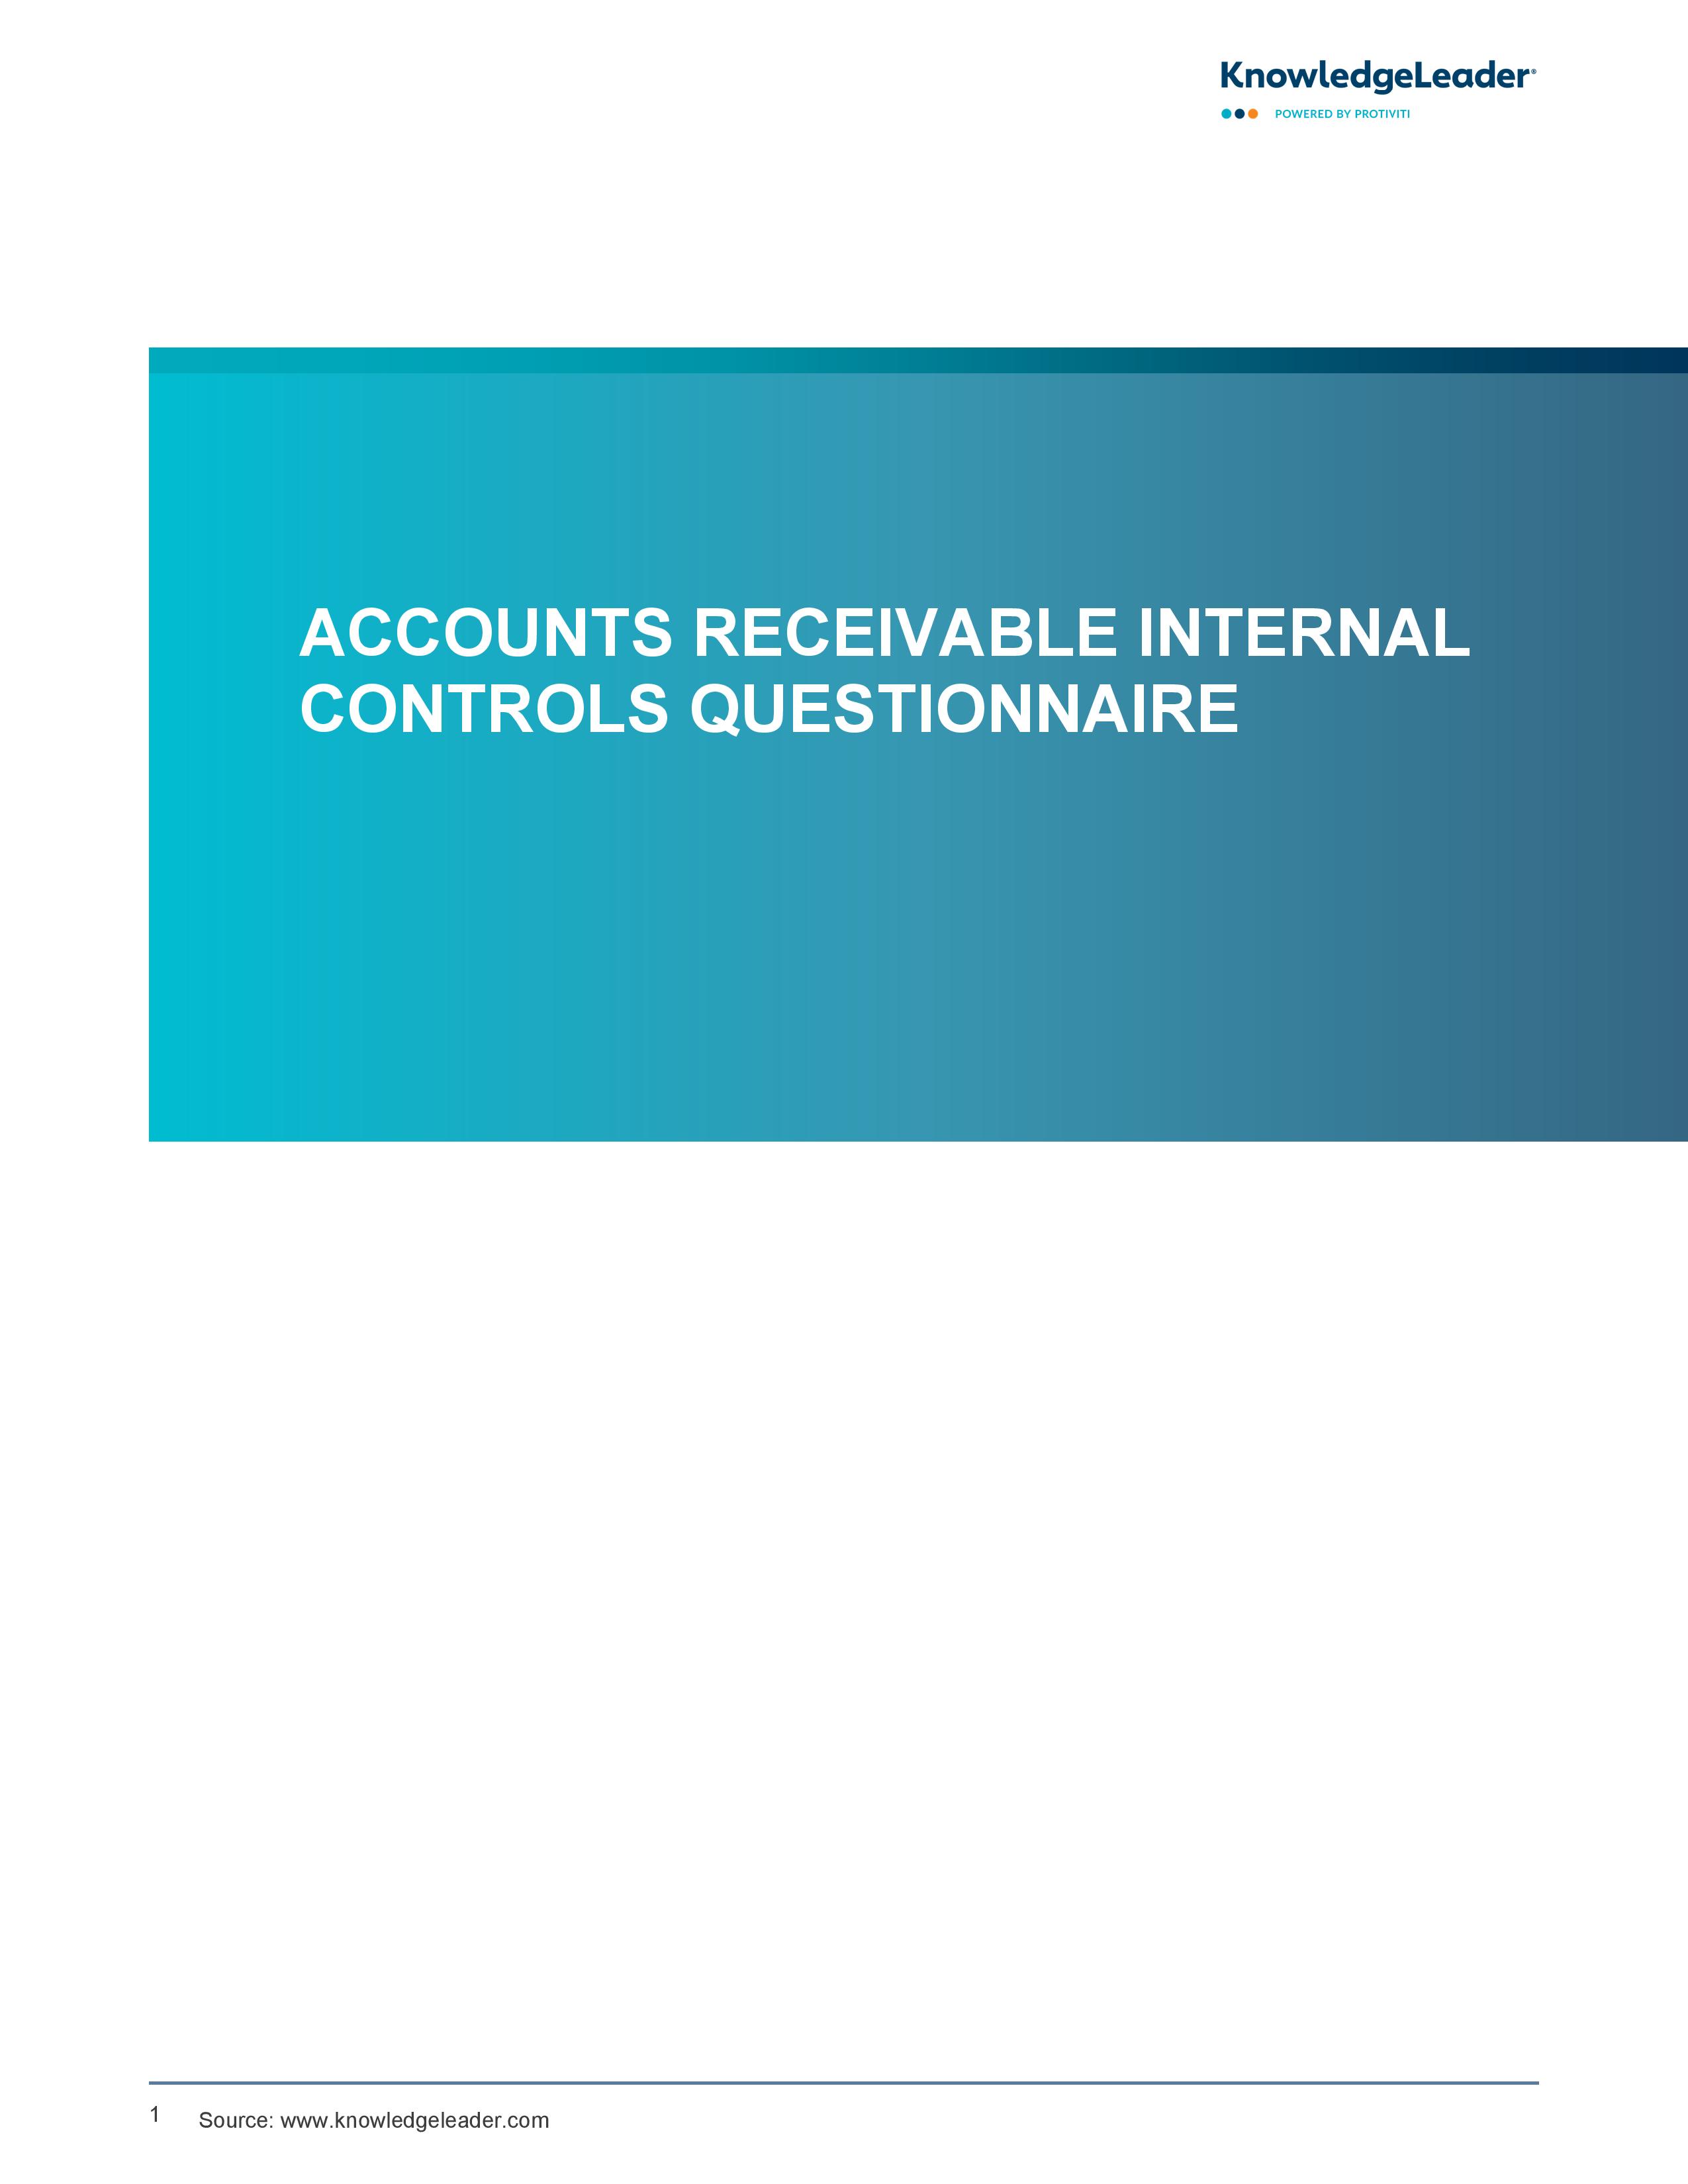 screenshot of the first page of Account Receivable Internal Controls Questionnaires